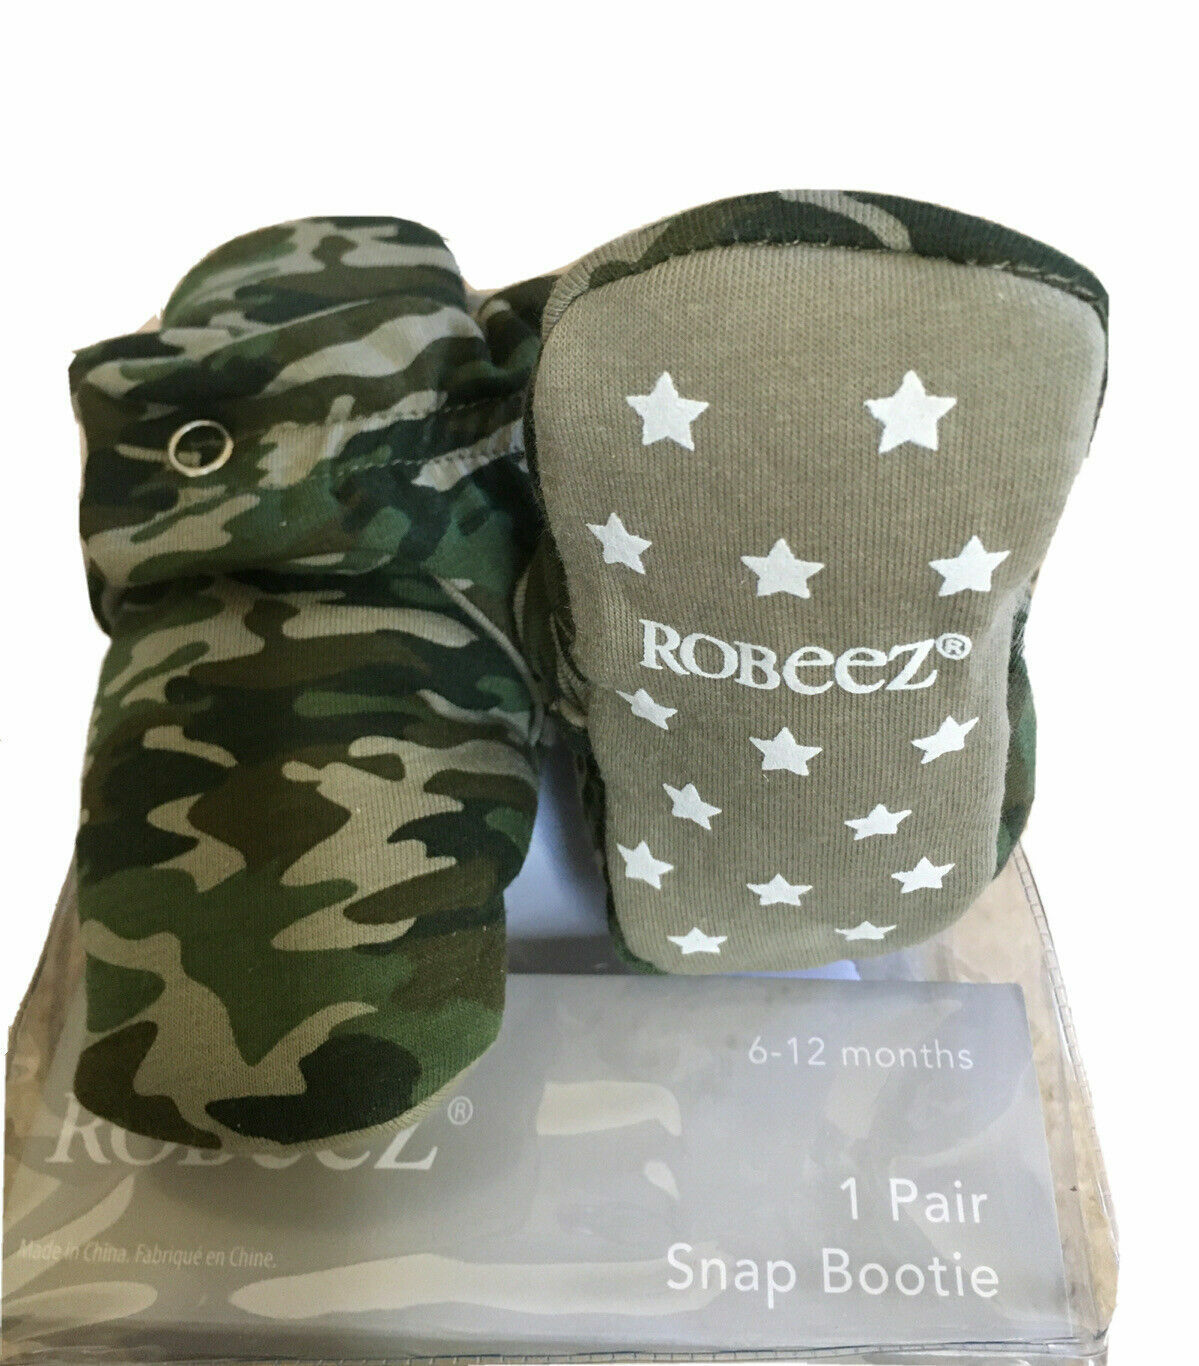 New Robeez Baby Snap Booties: Solids, Camo & Animal Designs; Sizes 